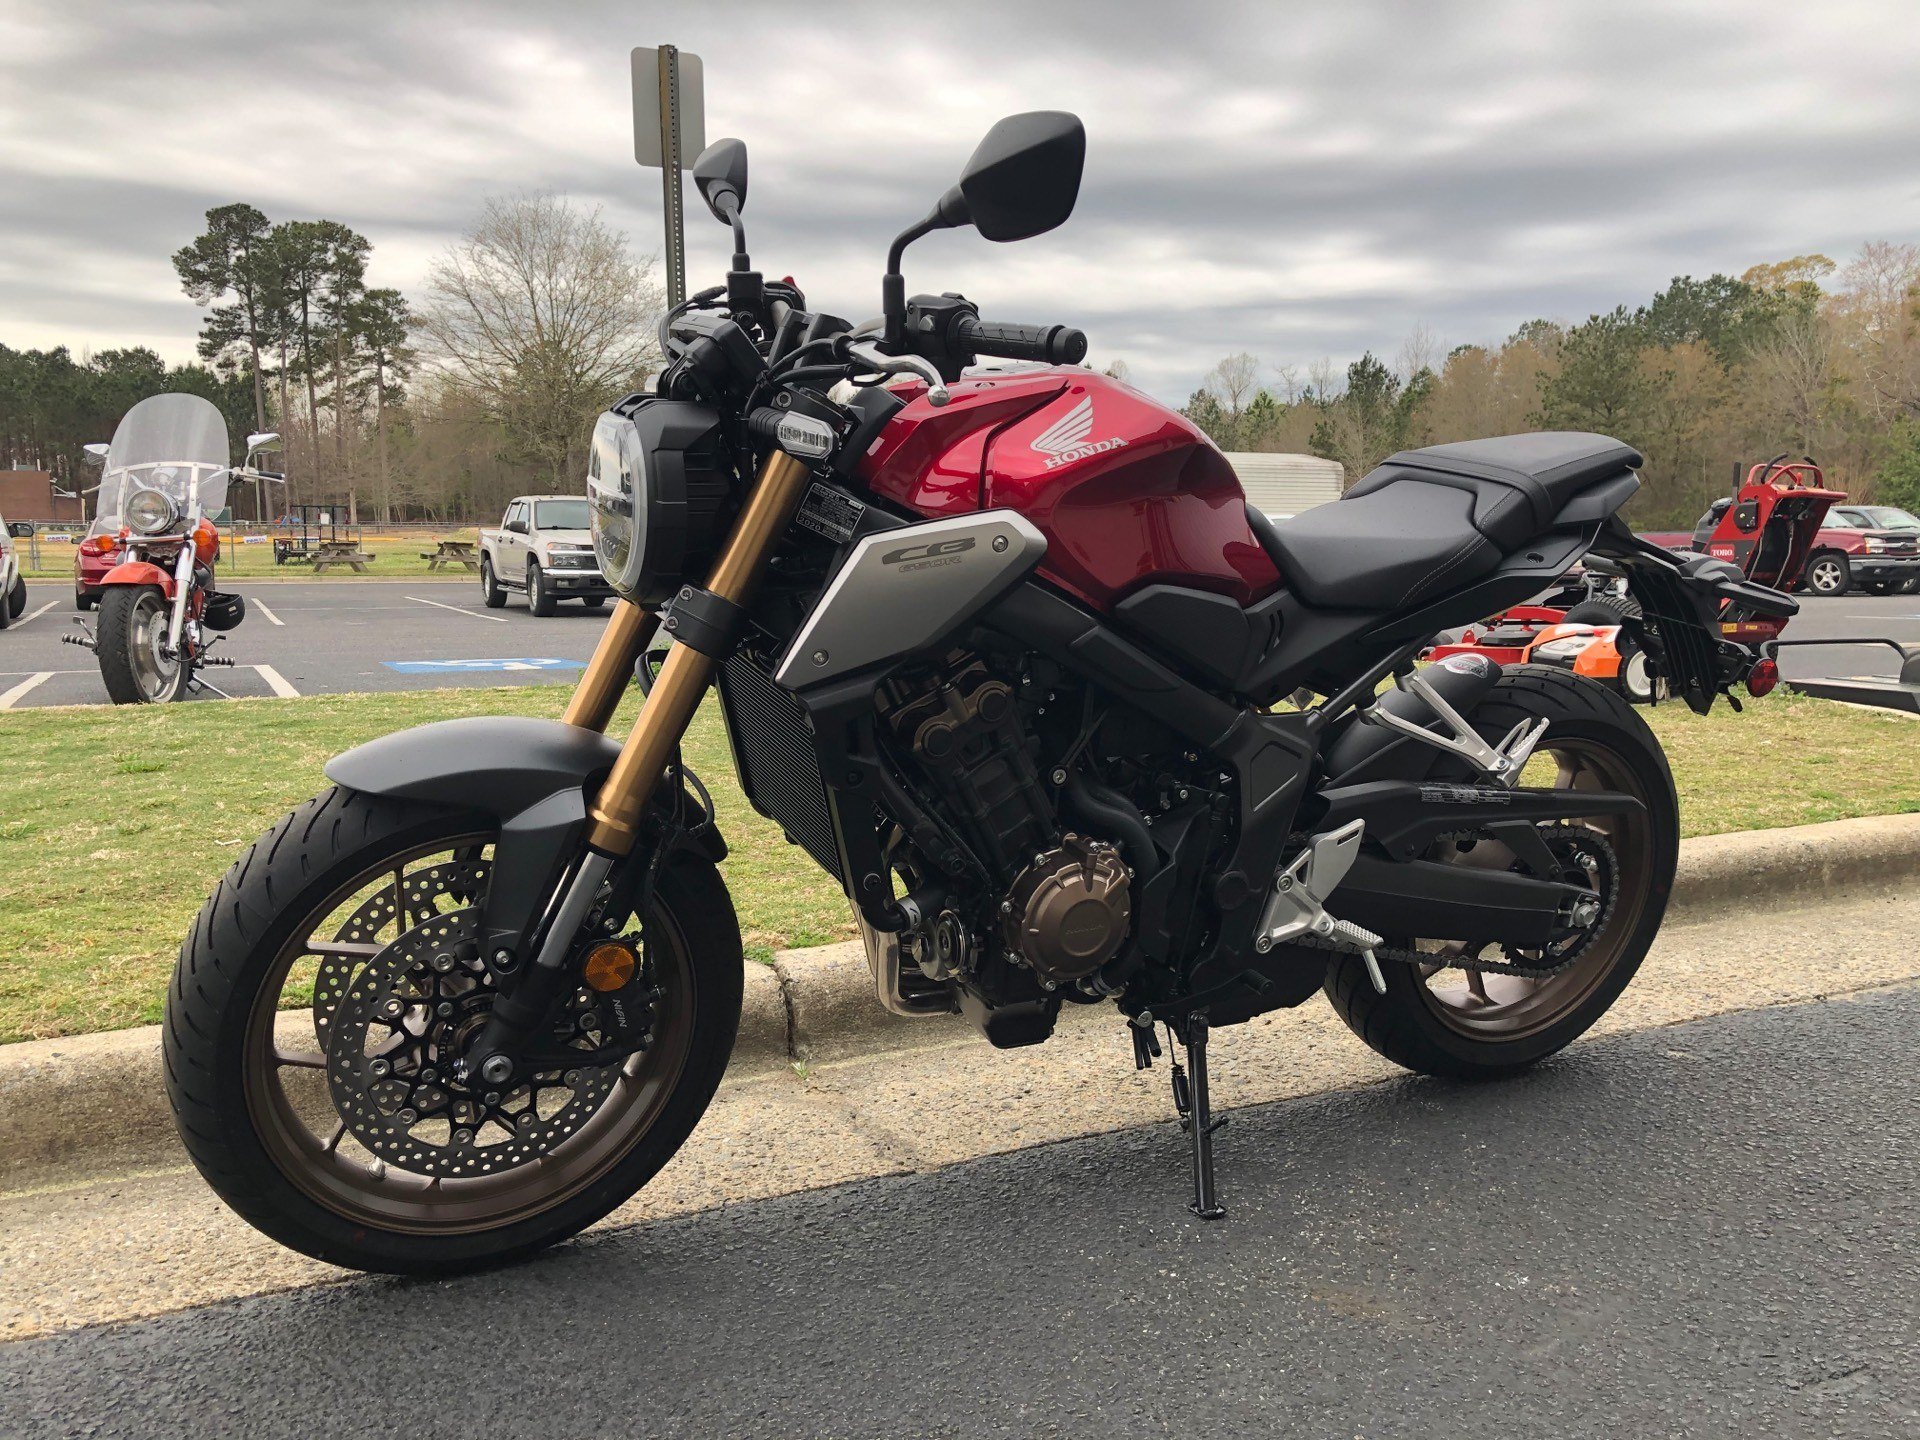 New 2020 Honda CB650R ABS Motorcycles in Greenville, NC | Stock Number: N/A